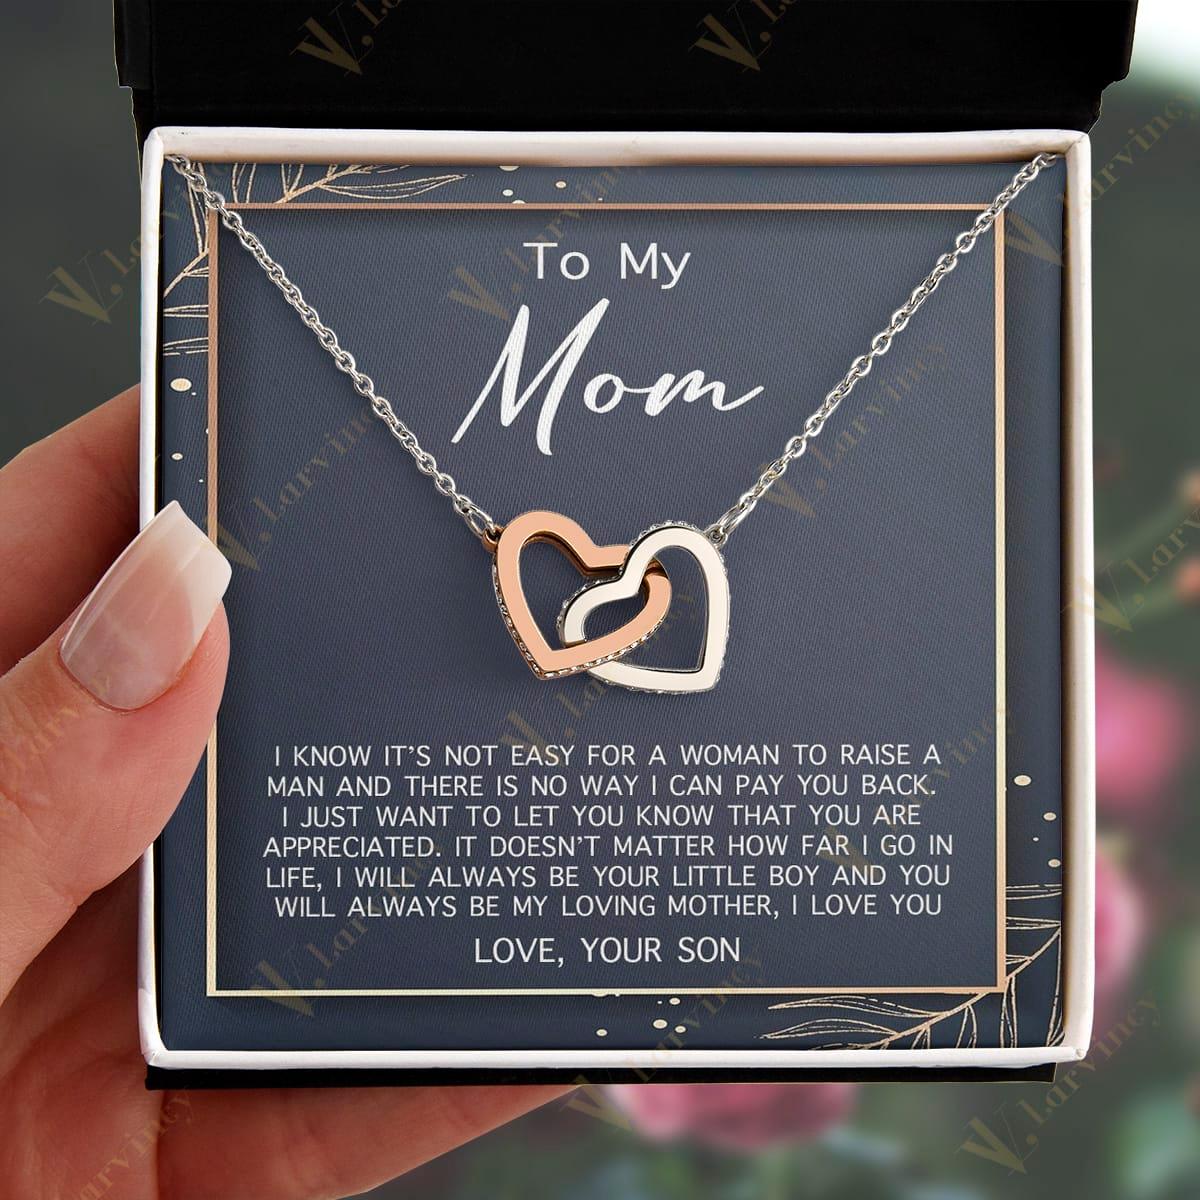 Mothers Day Gifts For Mom From Son, To My Mom Birthday Gifts From Son, Unique Jewelry Gifts For Mom With Gift Box Personalized Message Card, Love Mom - Larvincy Jewel